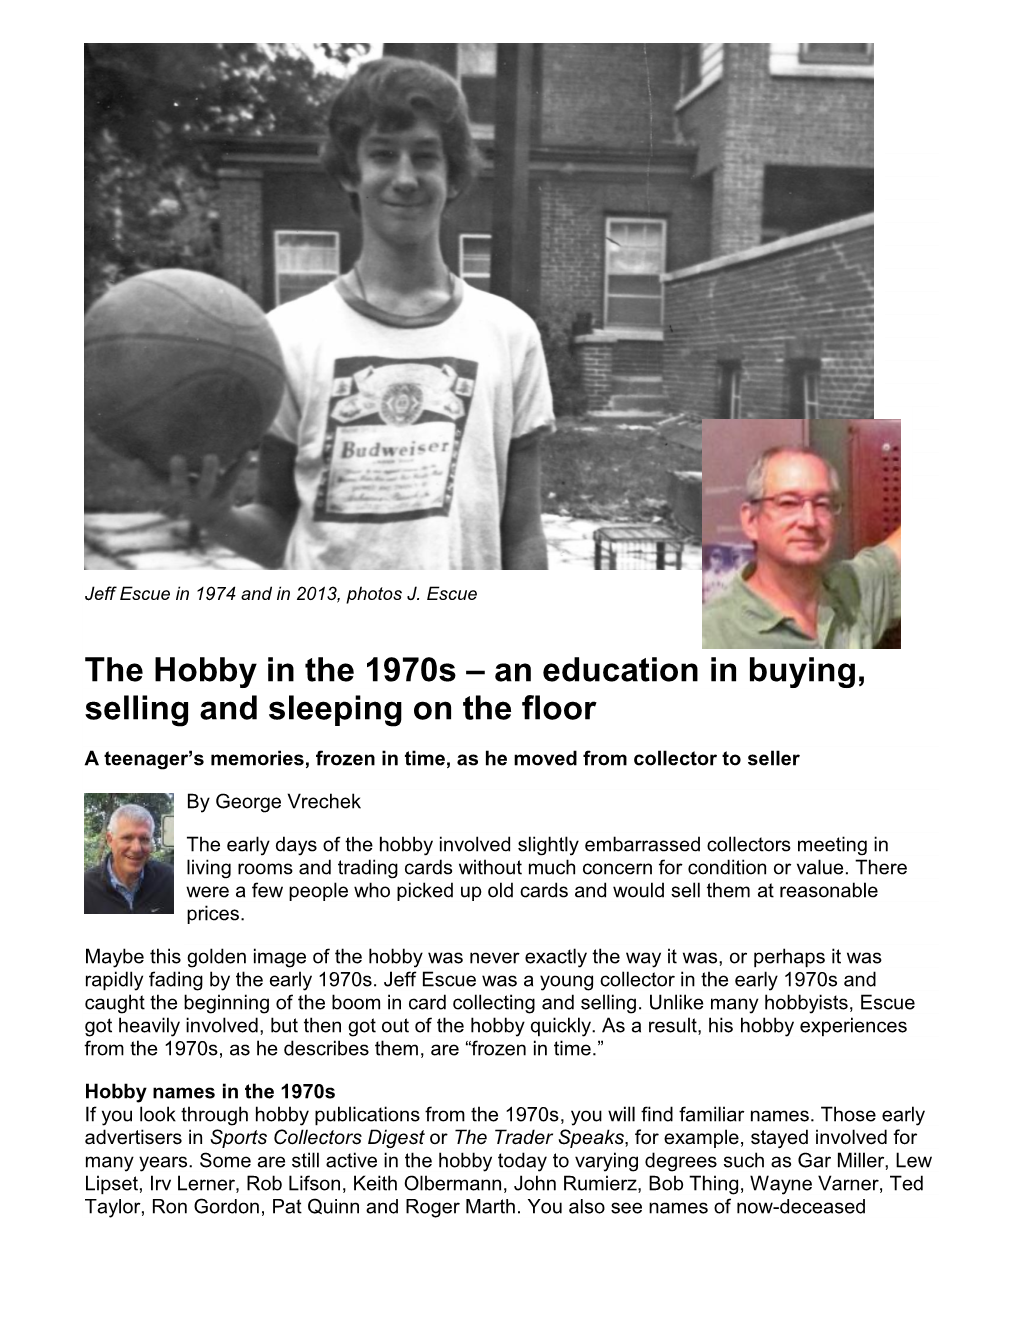 The Hobby in the 1970S – an Education in Buying, Selling and Sleeping on the Floor